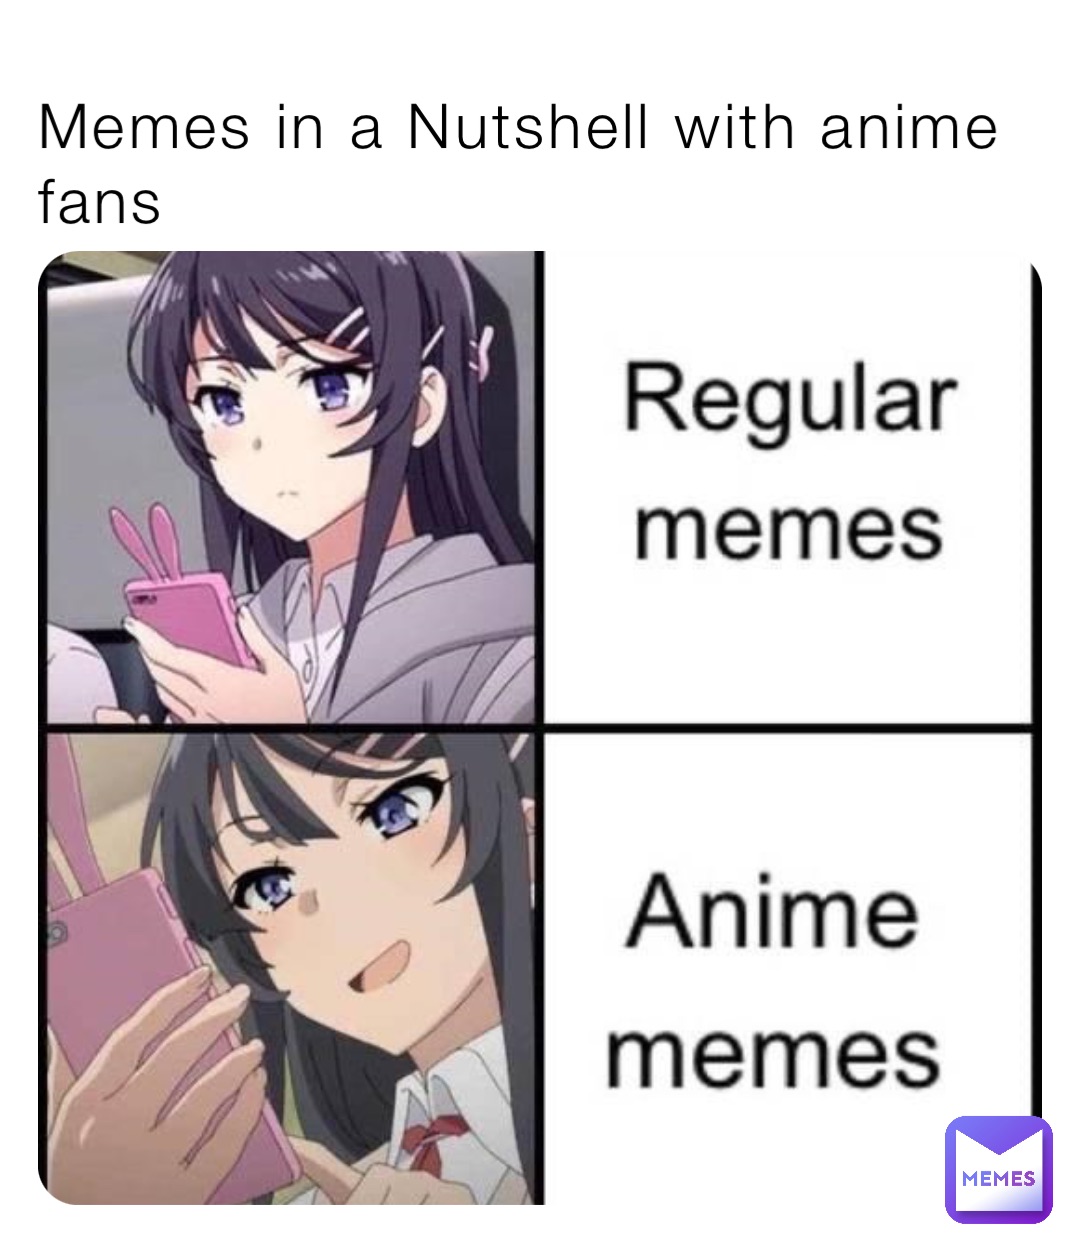 Memes in a Nutshell with anime fans